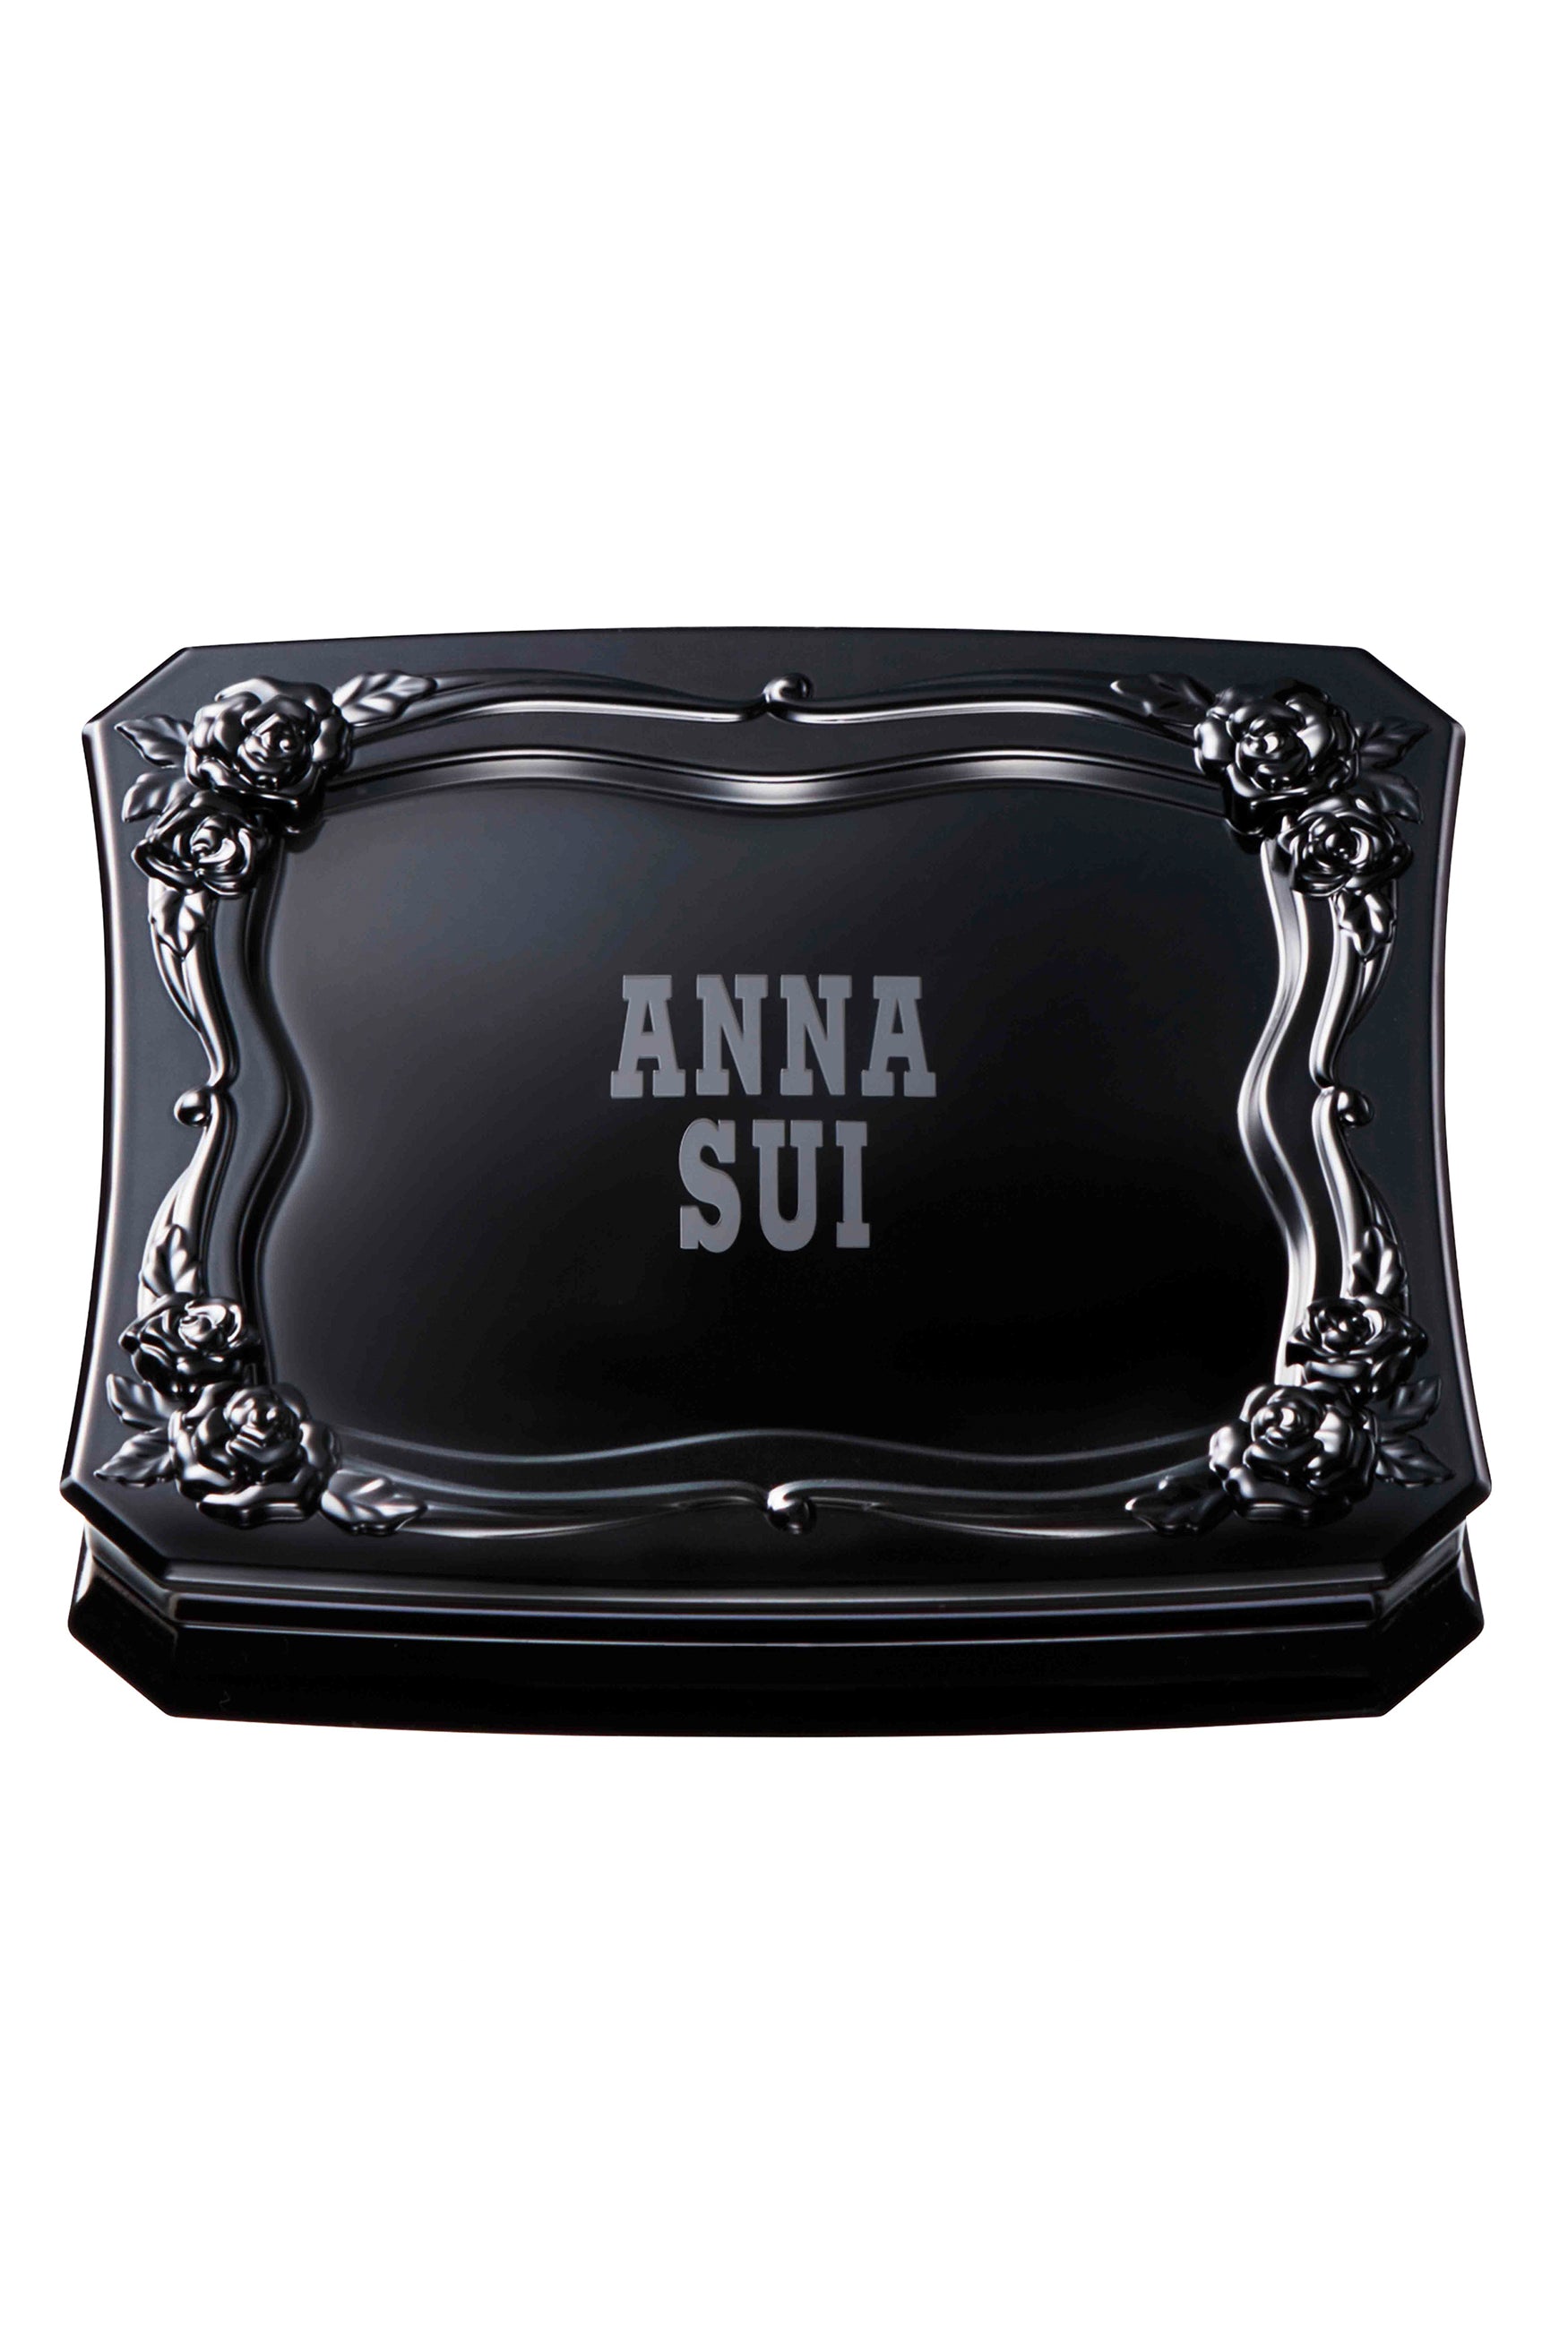 Eyebrow Compact black squared containers with curvy edges, a raised roses pattern on the edge of top lid, Anna Sui label in white